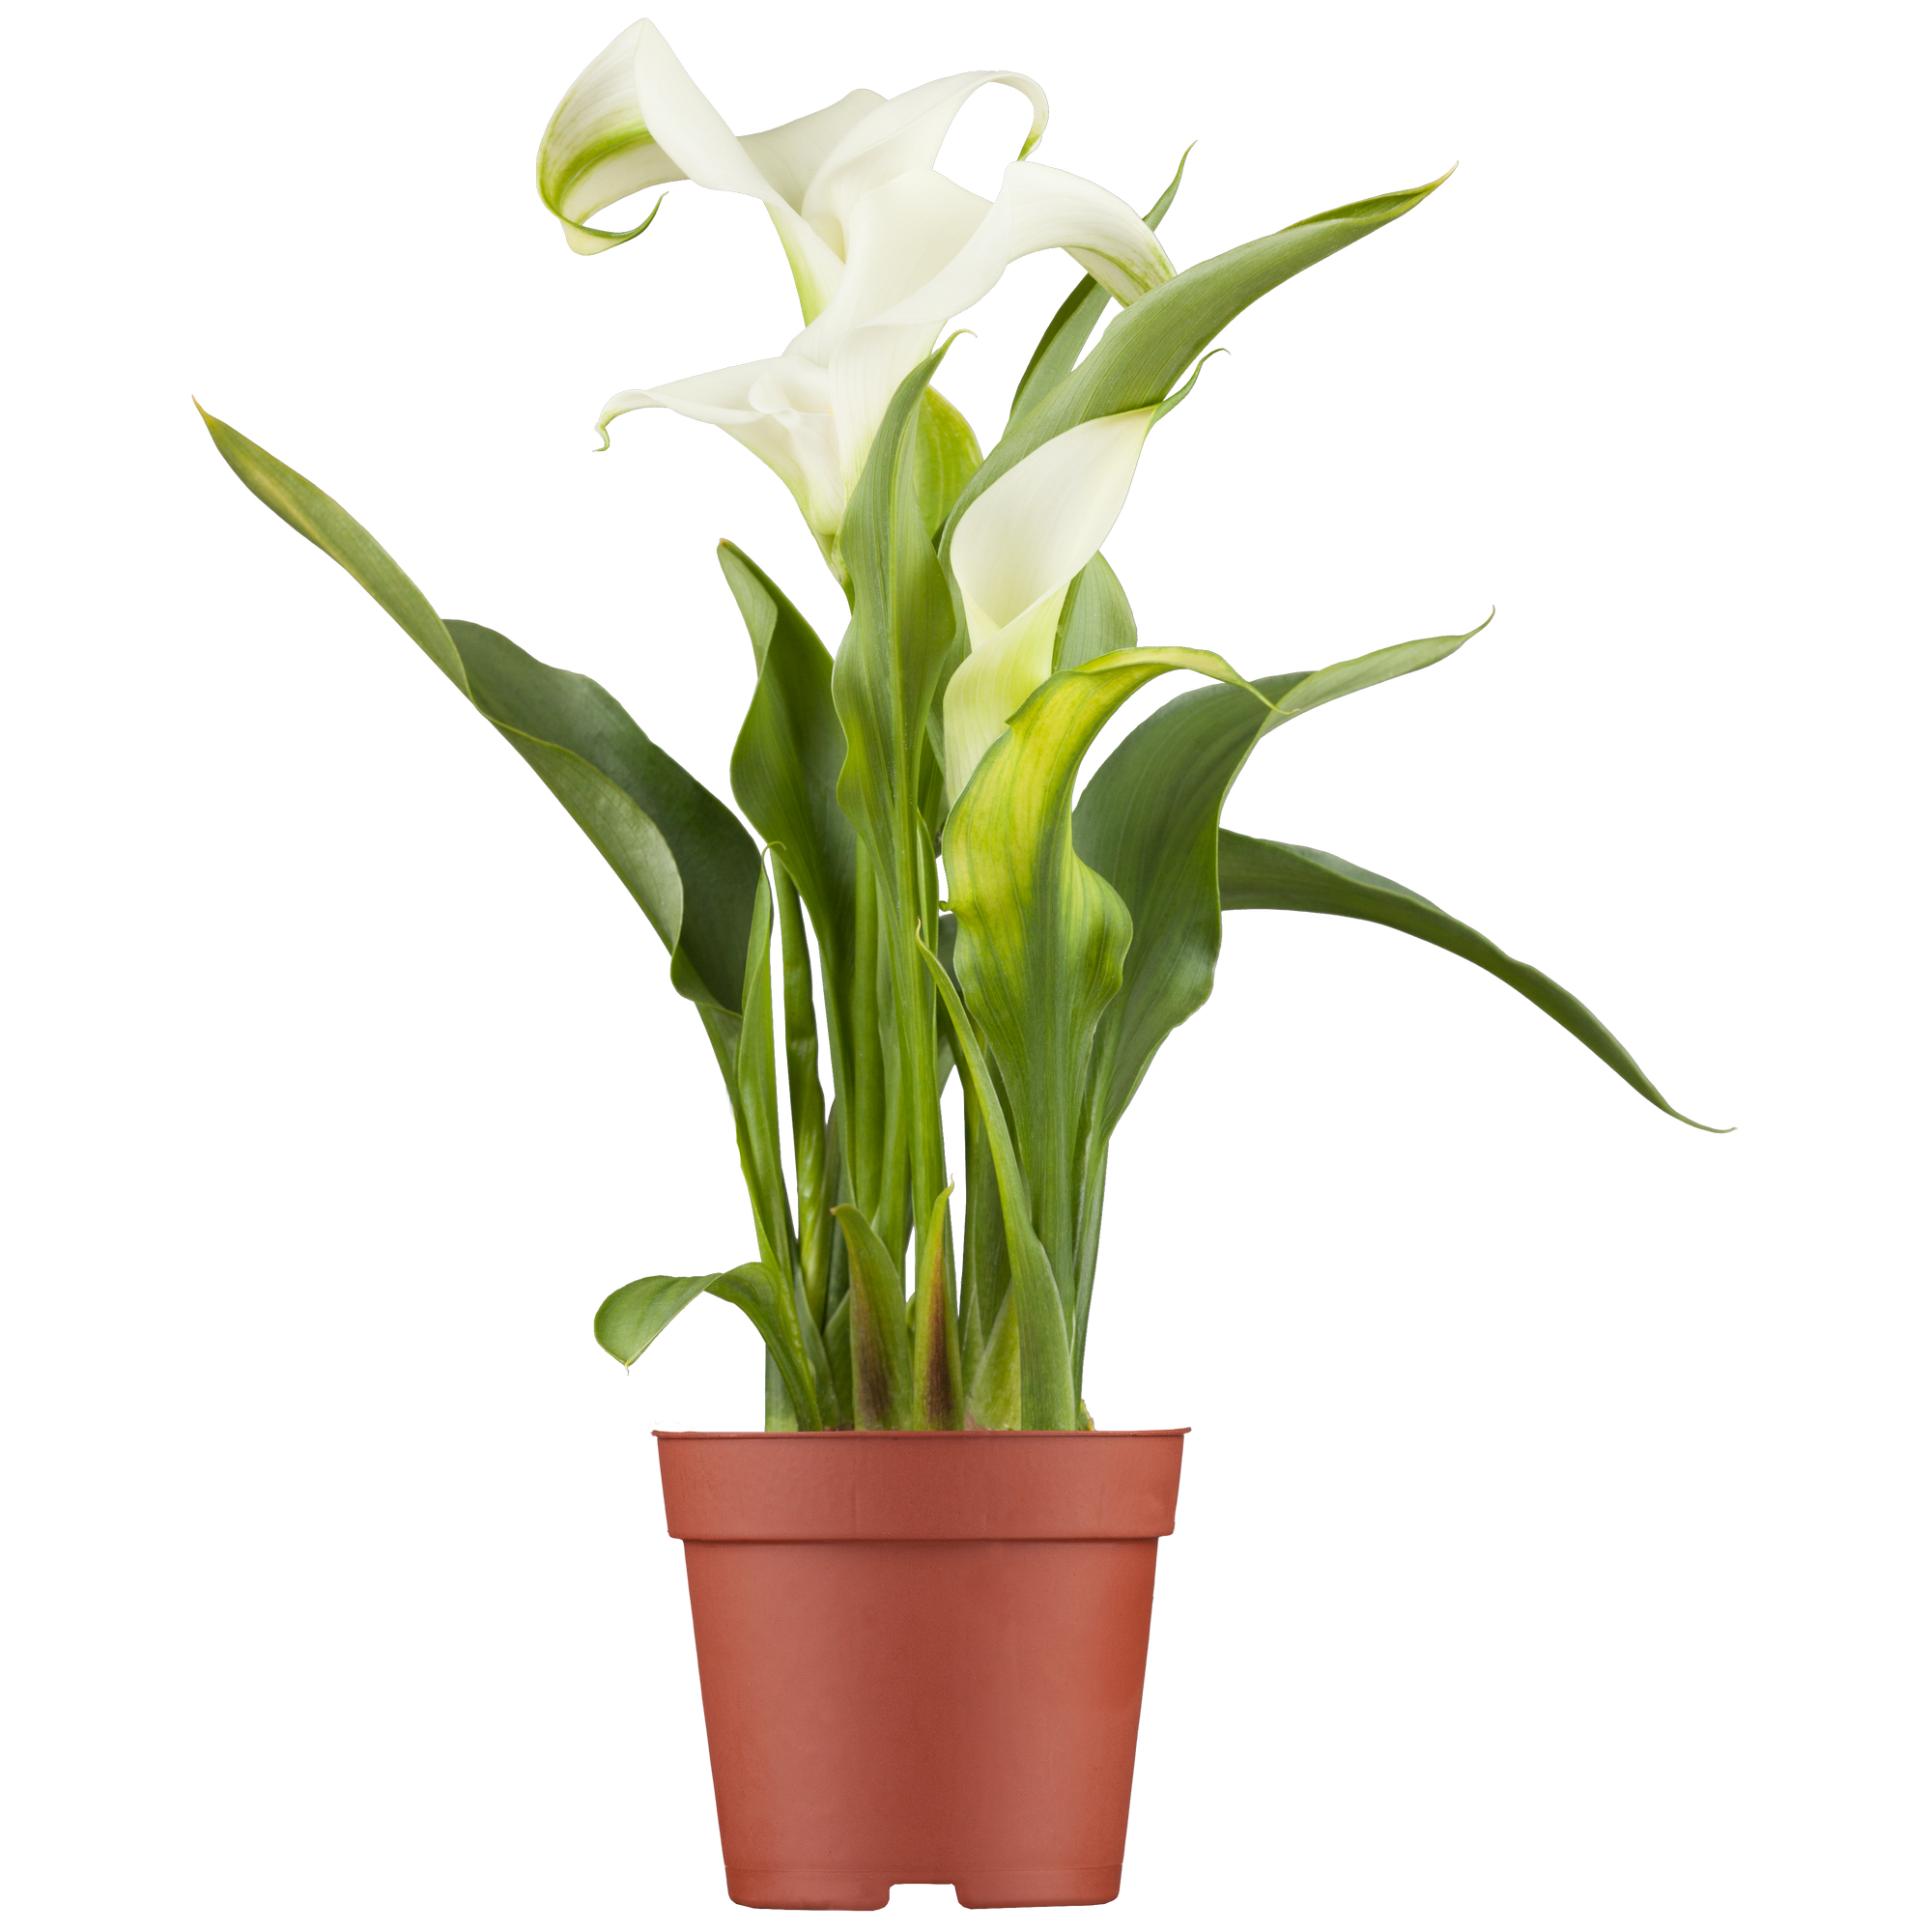 Zimmer-Calla weiß, 13 cm Topf + product picture